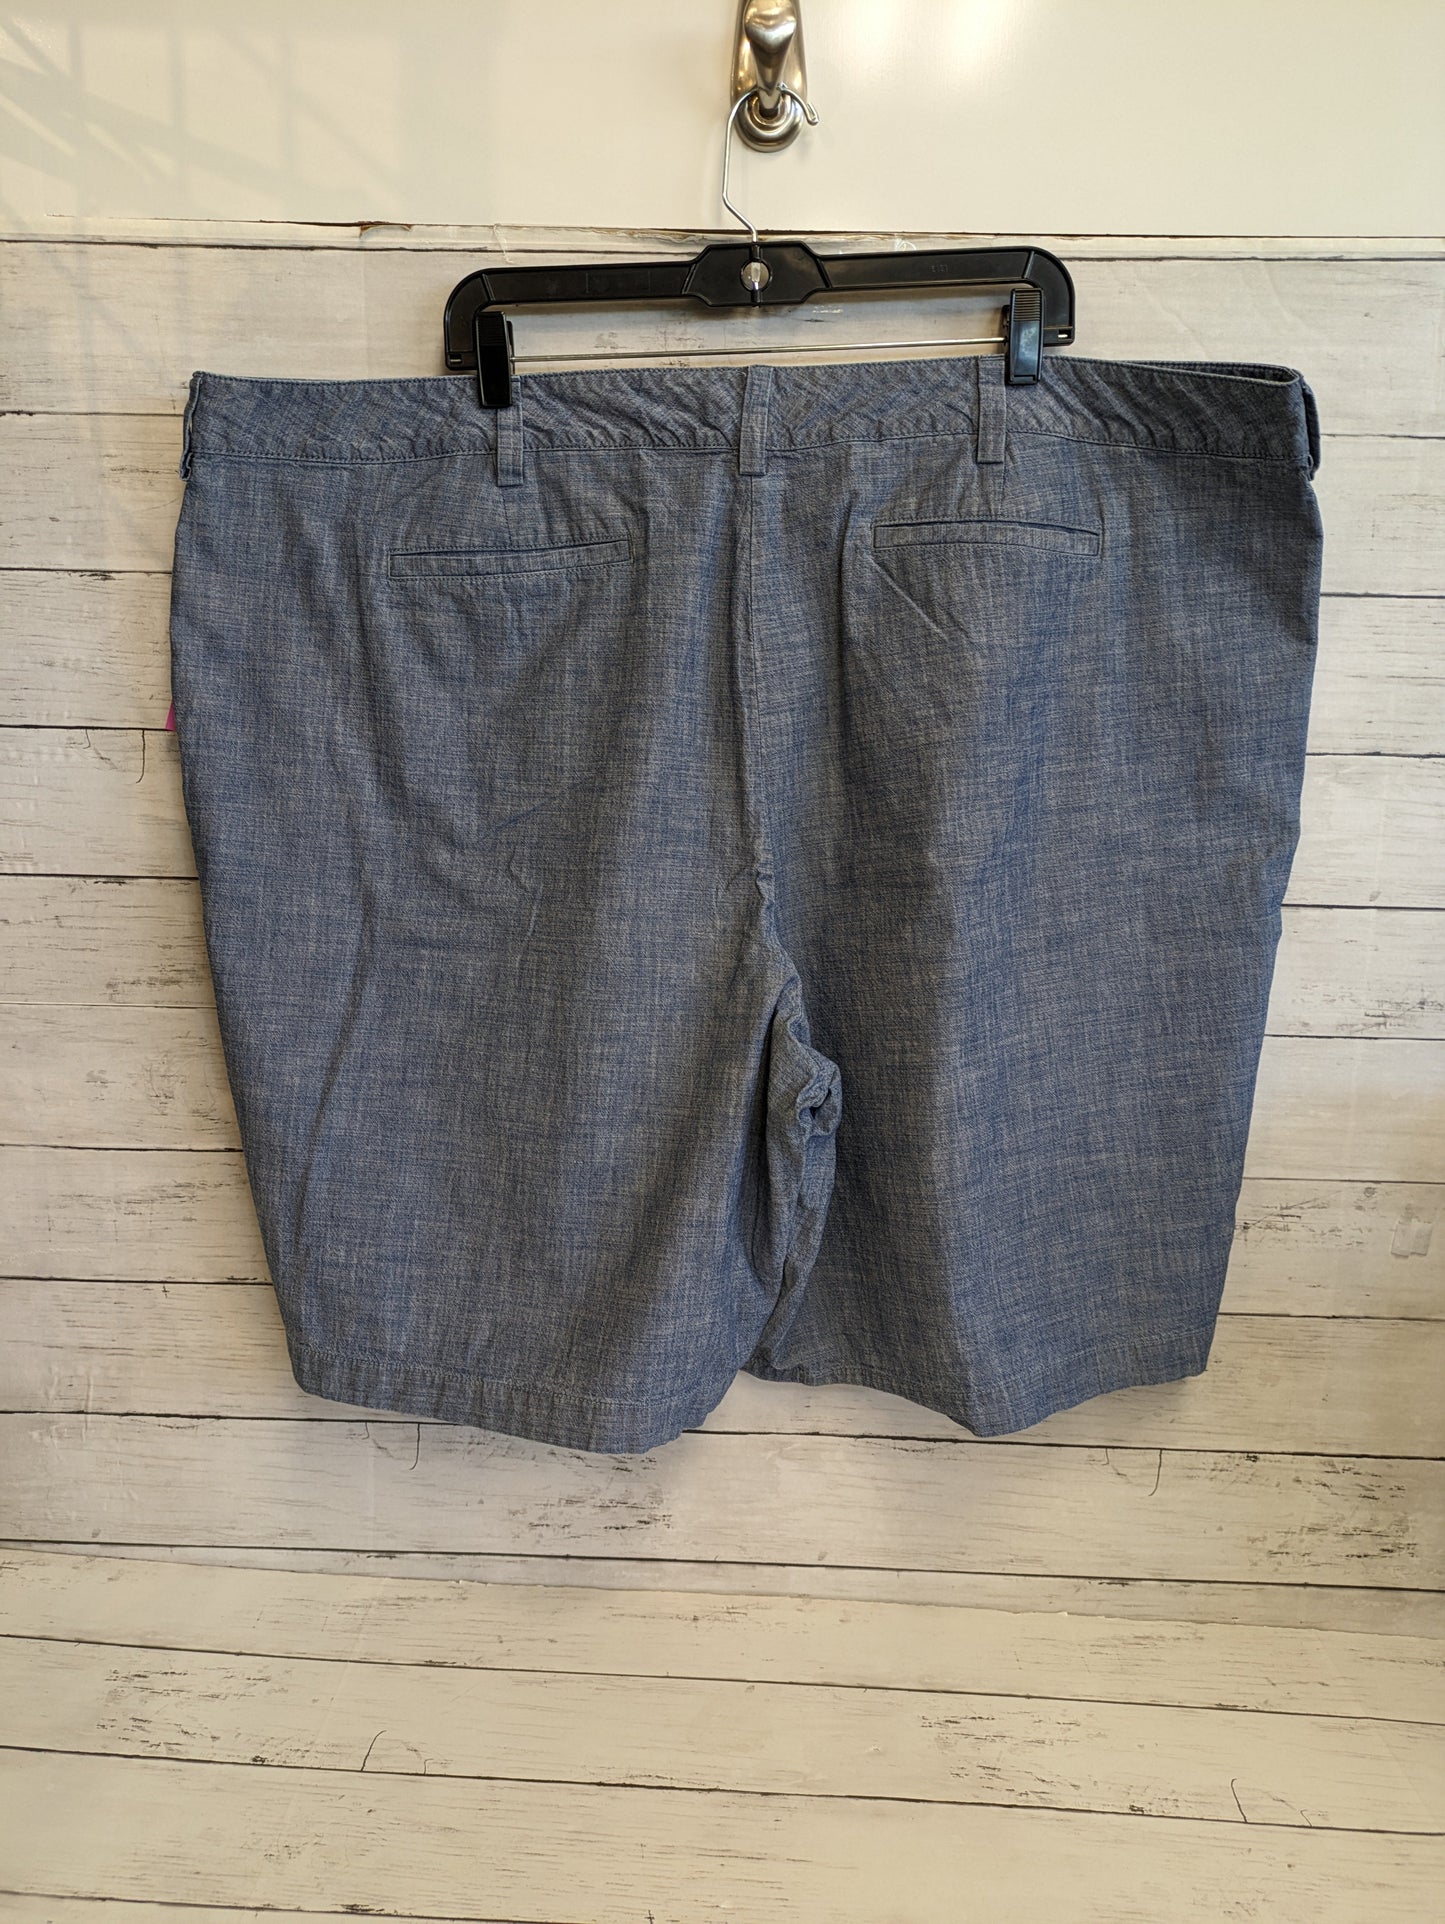 Shorts By Lands End  Size: 26